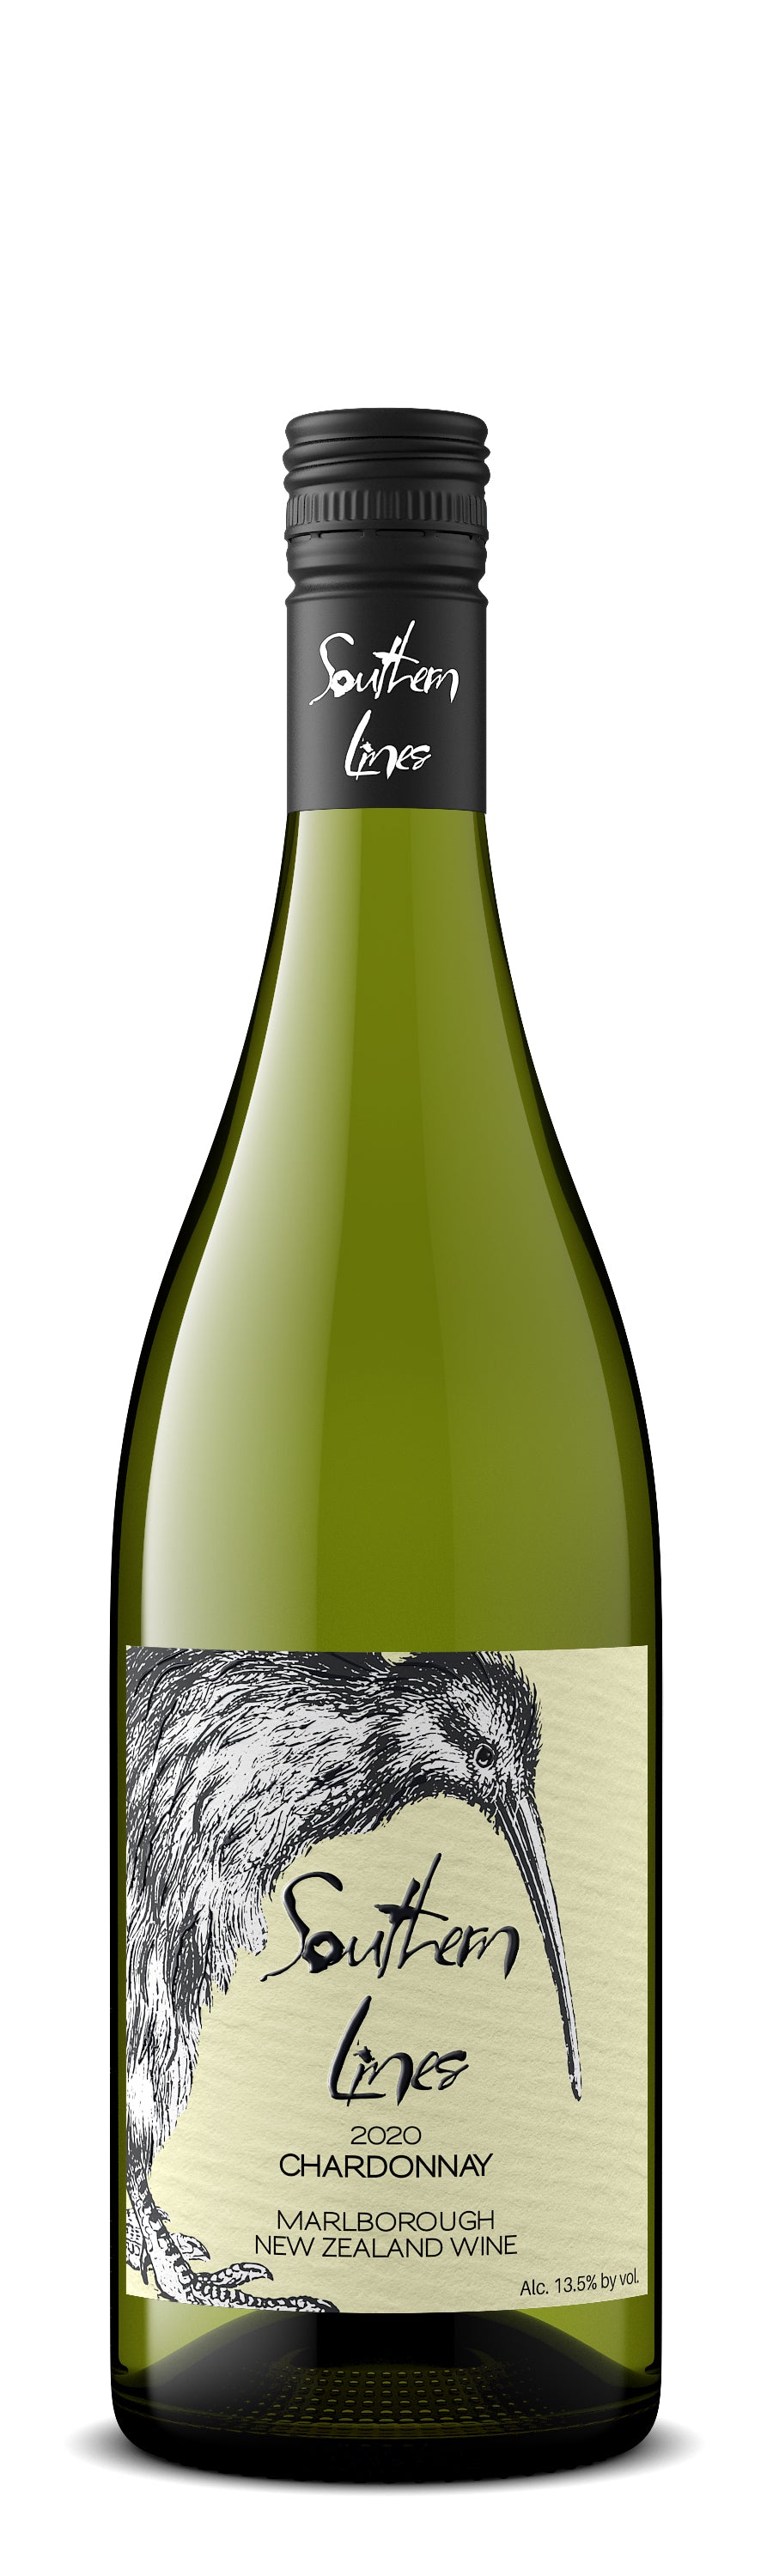 Southern Lines Chardonnay 2020